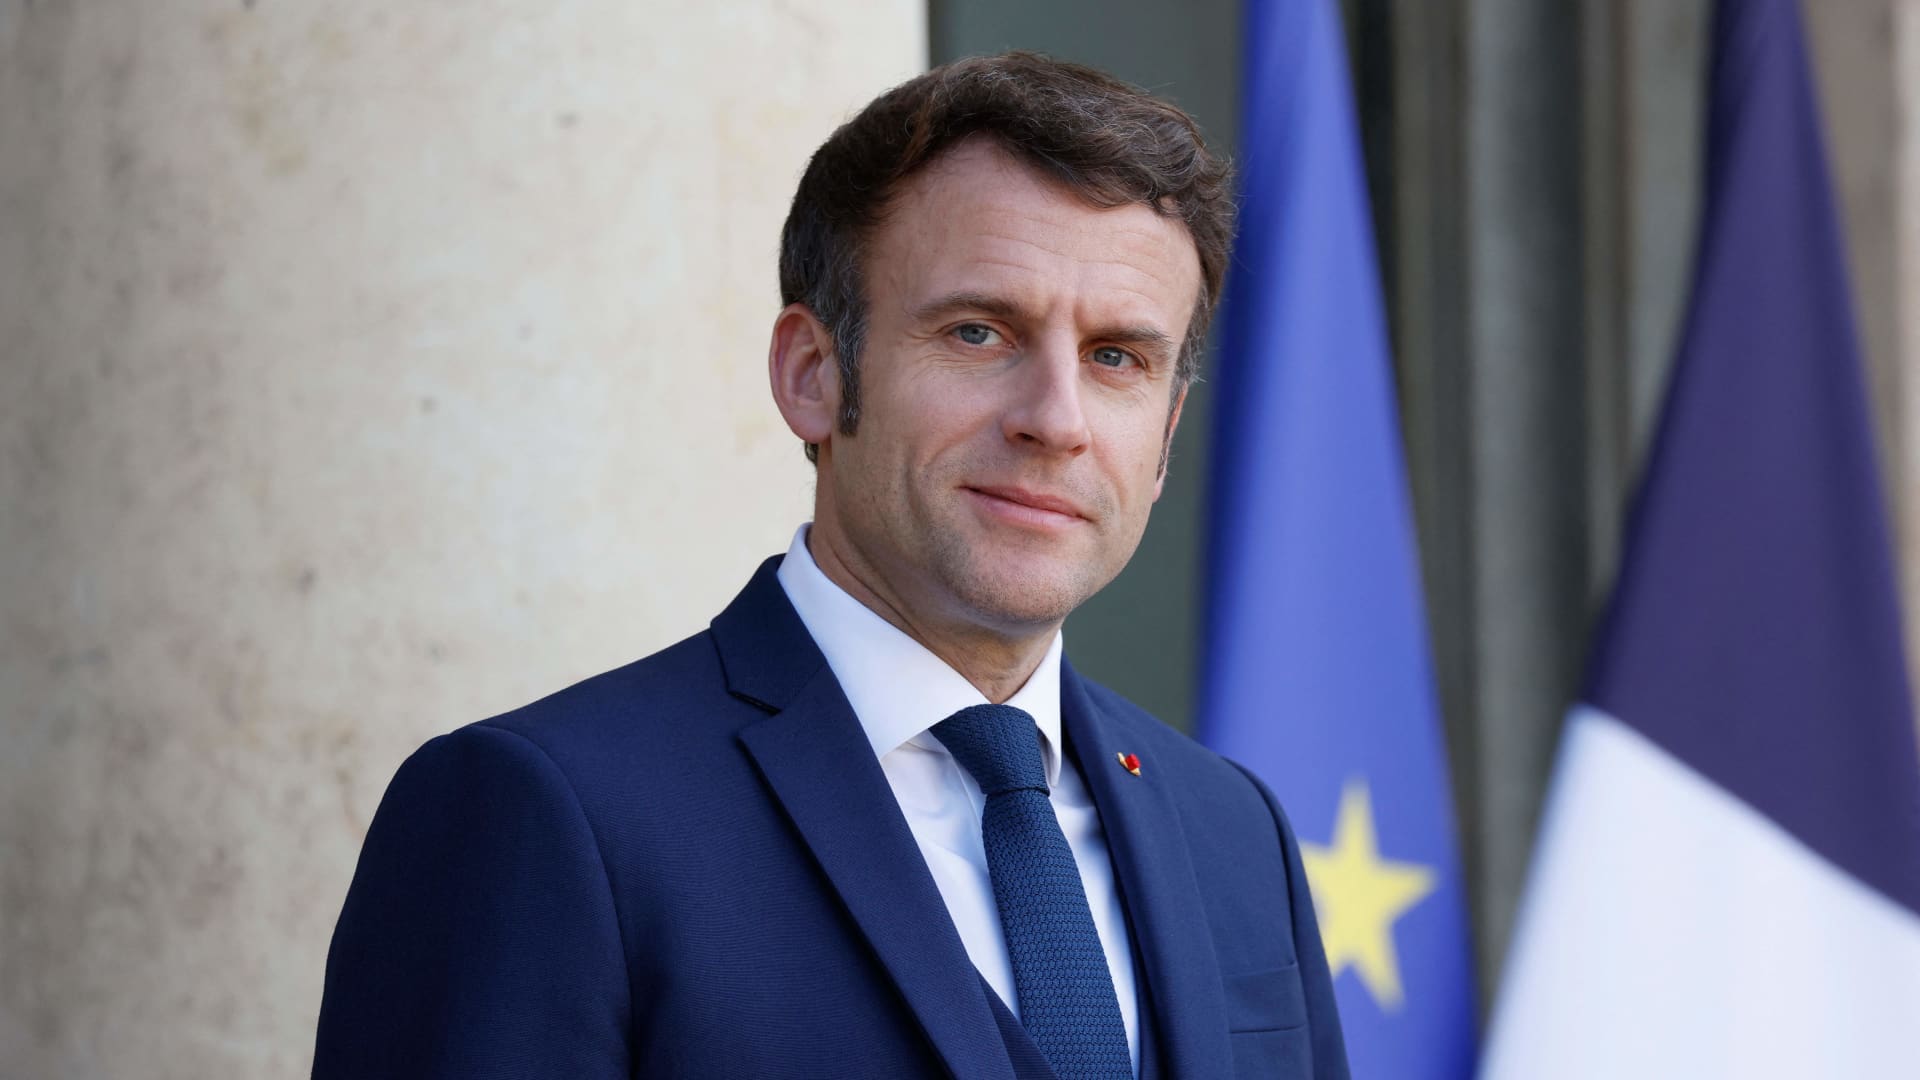 French President Emmanuel Macron at the Elysee Palace in Paris on February 28, 2022.